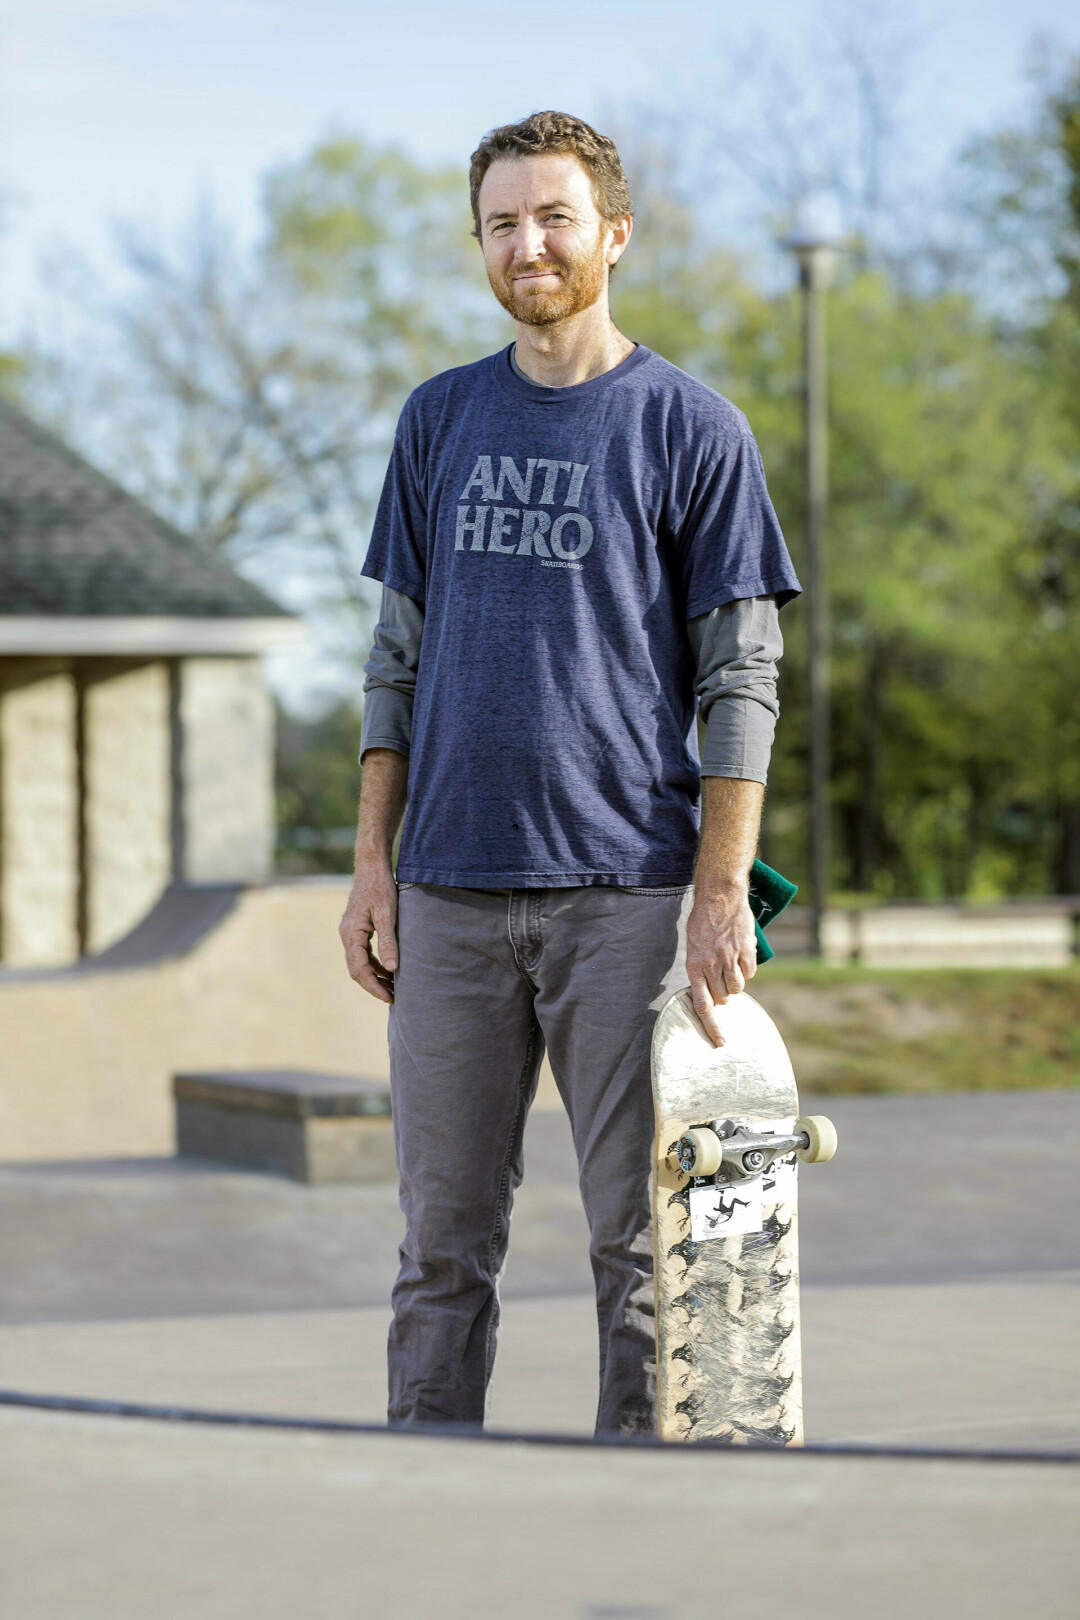 Gabe Brummett, founder of the Eau Claire Skaters Association, has played an enormous role in the past decade advocating for a more robust skateboarding community in Eau Claire. (Photo by Andrea Paulseth)